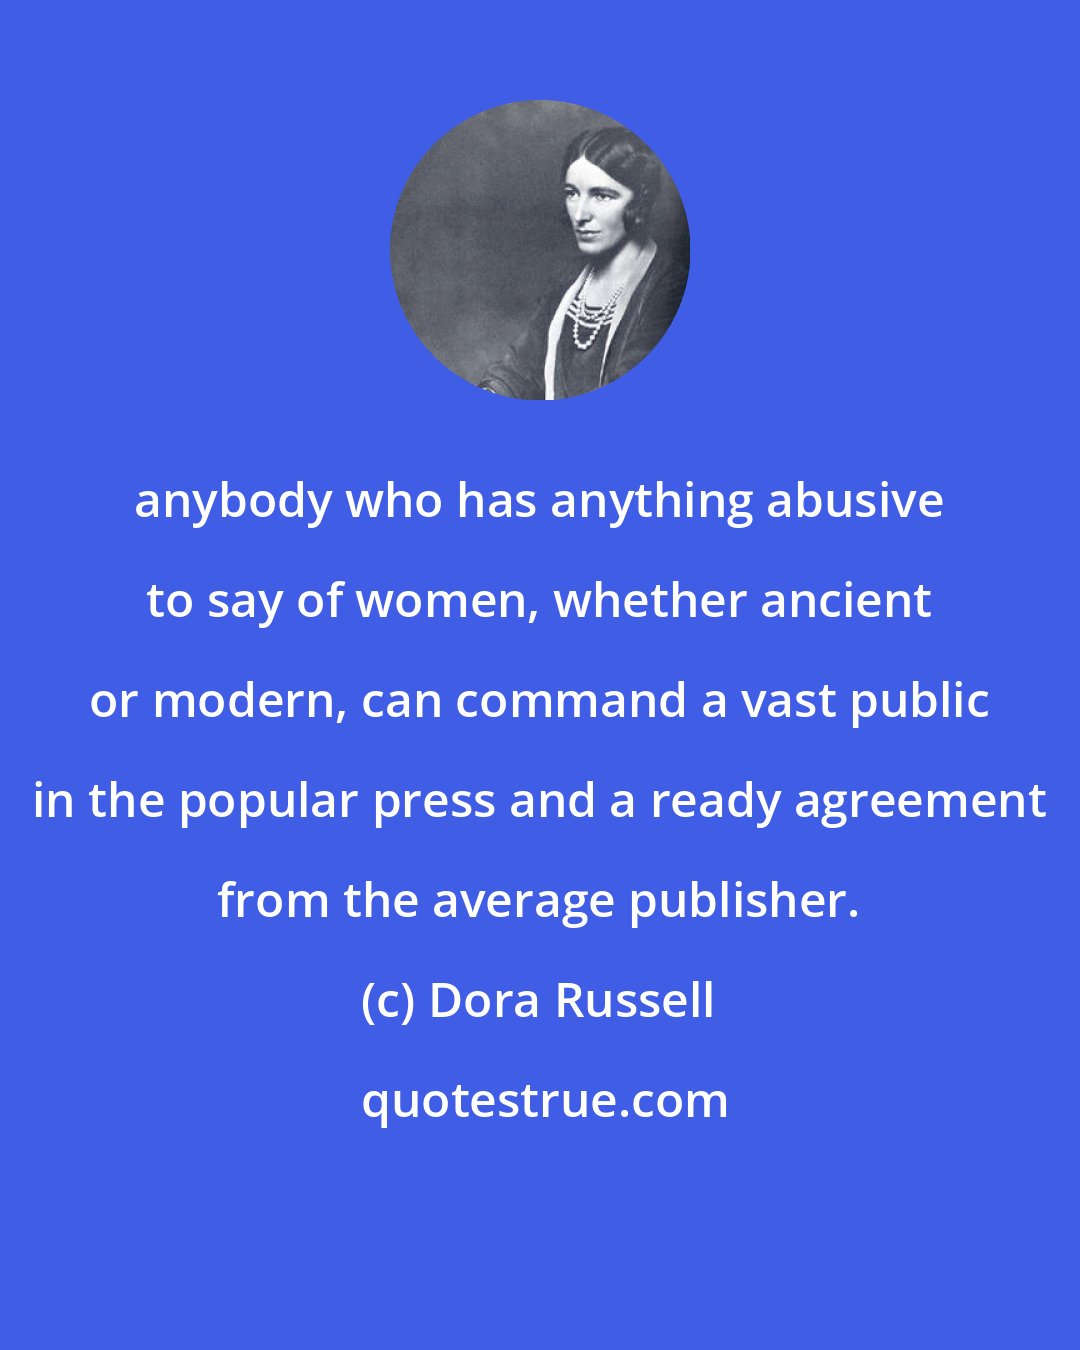 Dora Russell: anybody who has anything abusive to say of women, whether ancient or modern, can command a vast public in the popular press and a ready agreement from the average publisher.